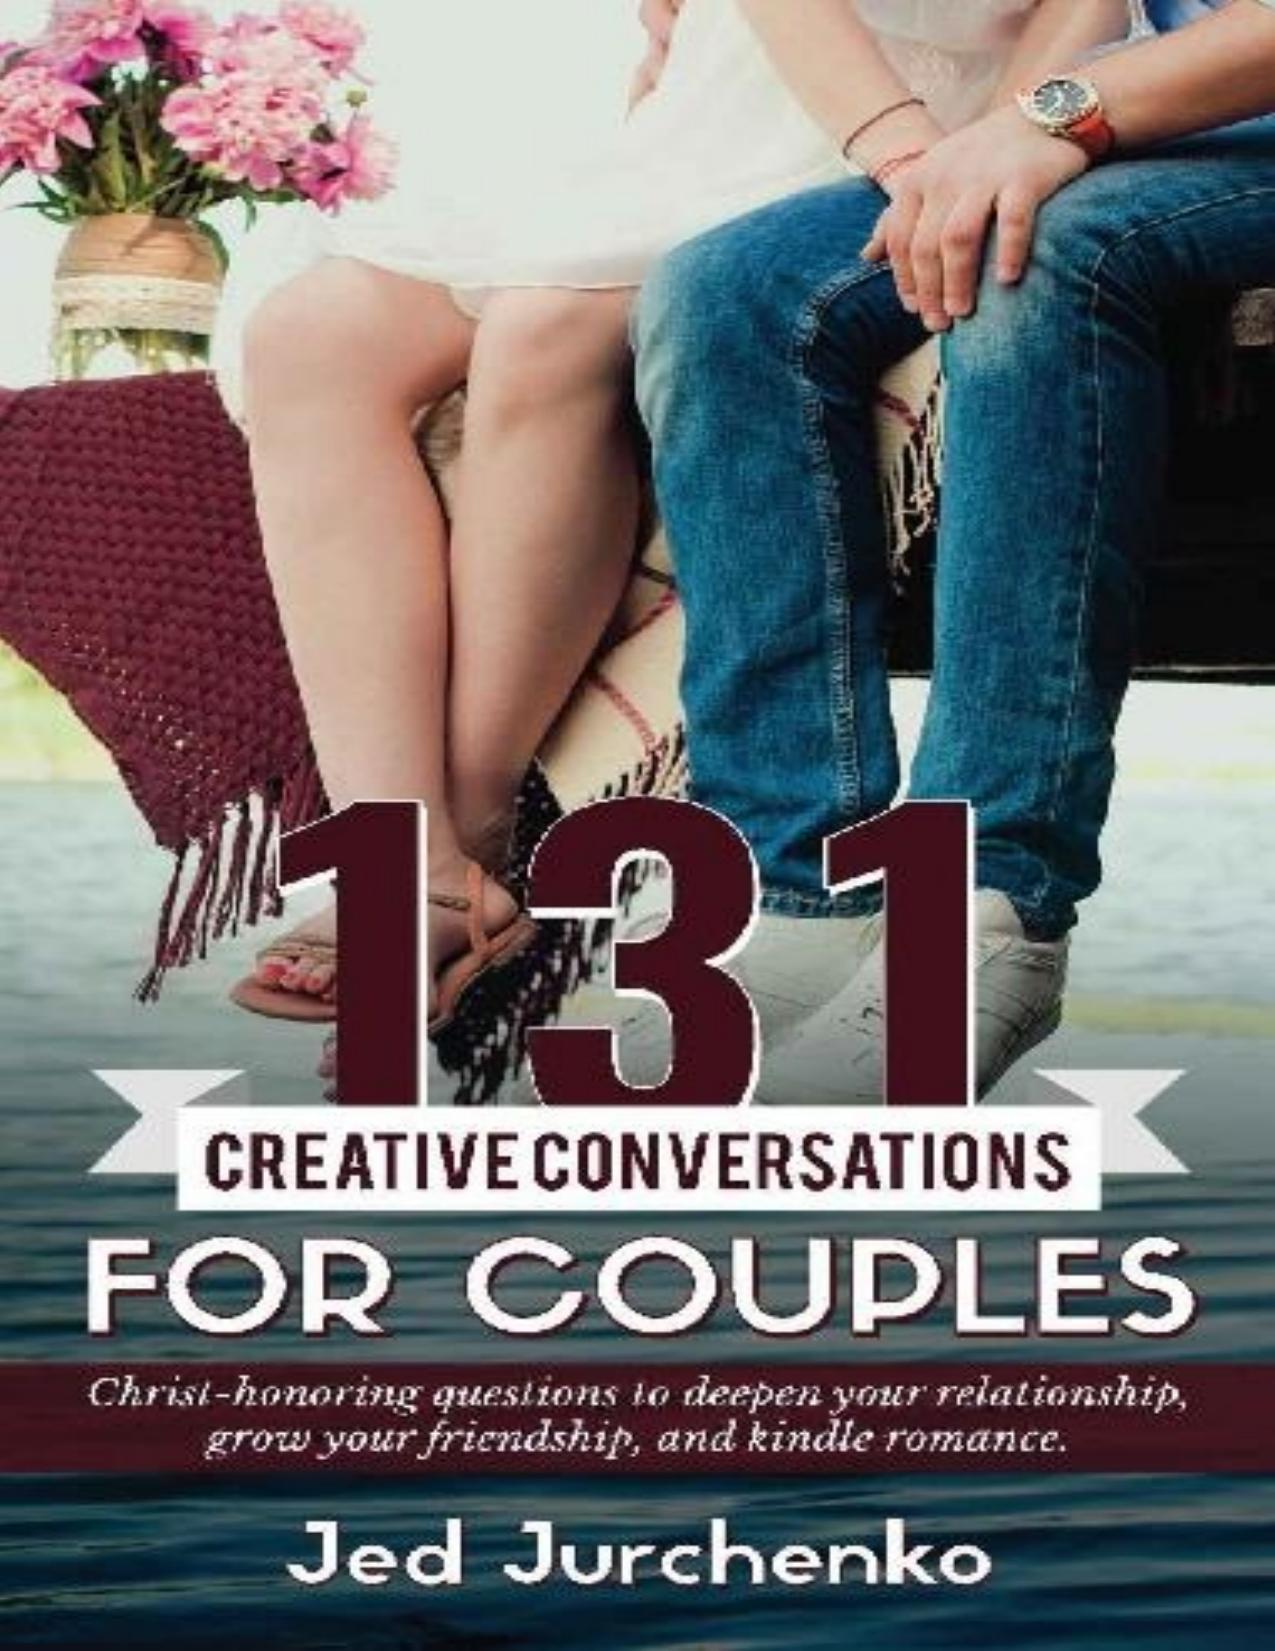 131 Creative Conversations For Couples: Christ-honoring questions to deepen your relationship, grow your friendship, and ignite romance. (Creative Conversations Series)